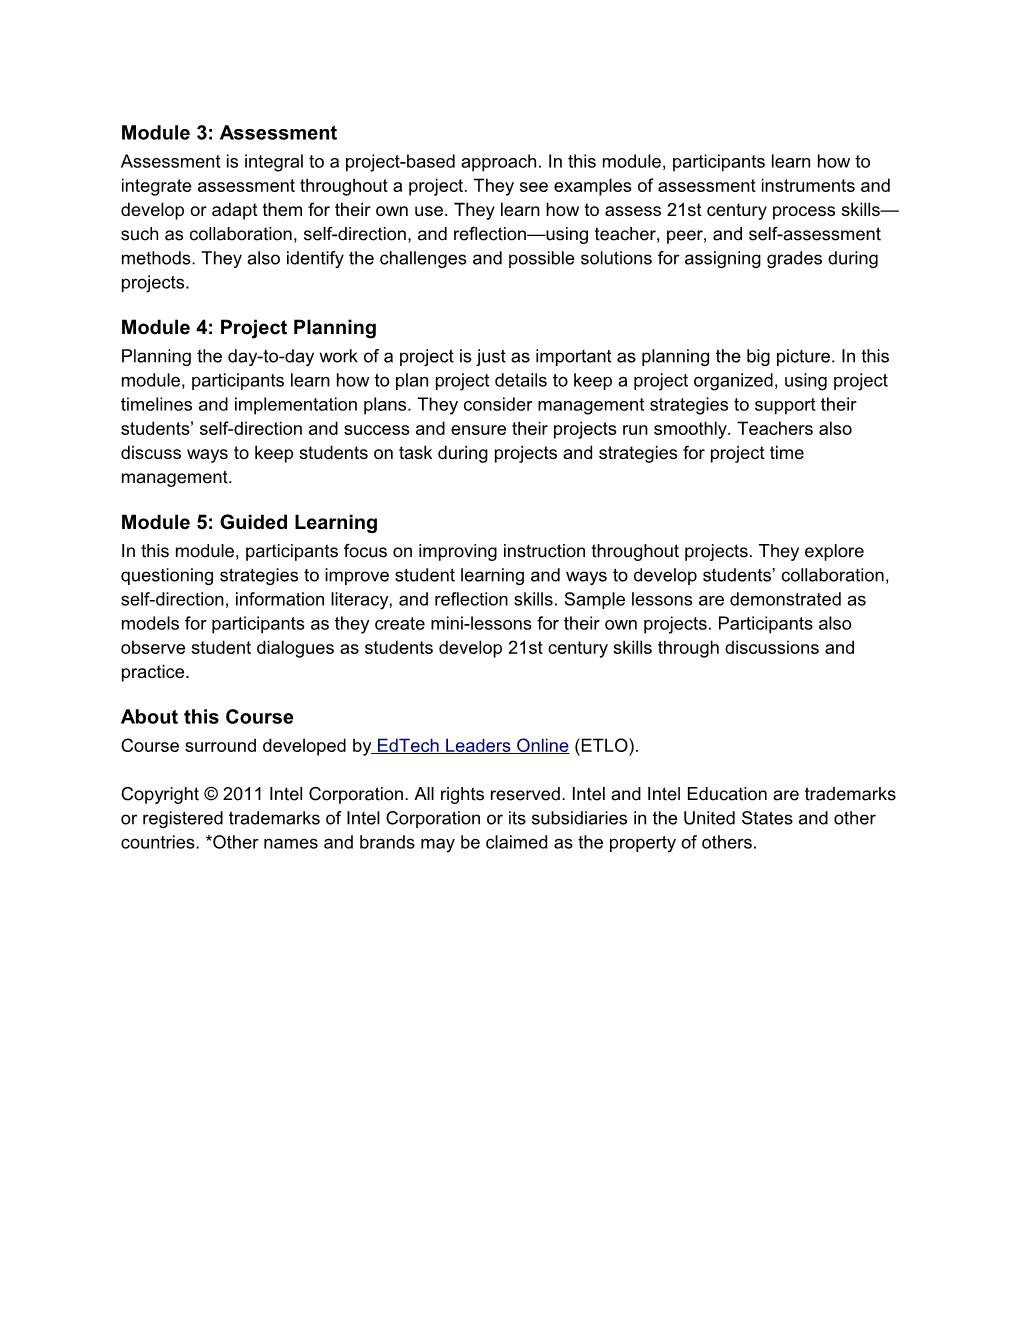 Intel Teach Elements: Project-Based Approaches